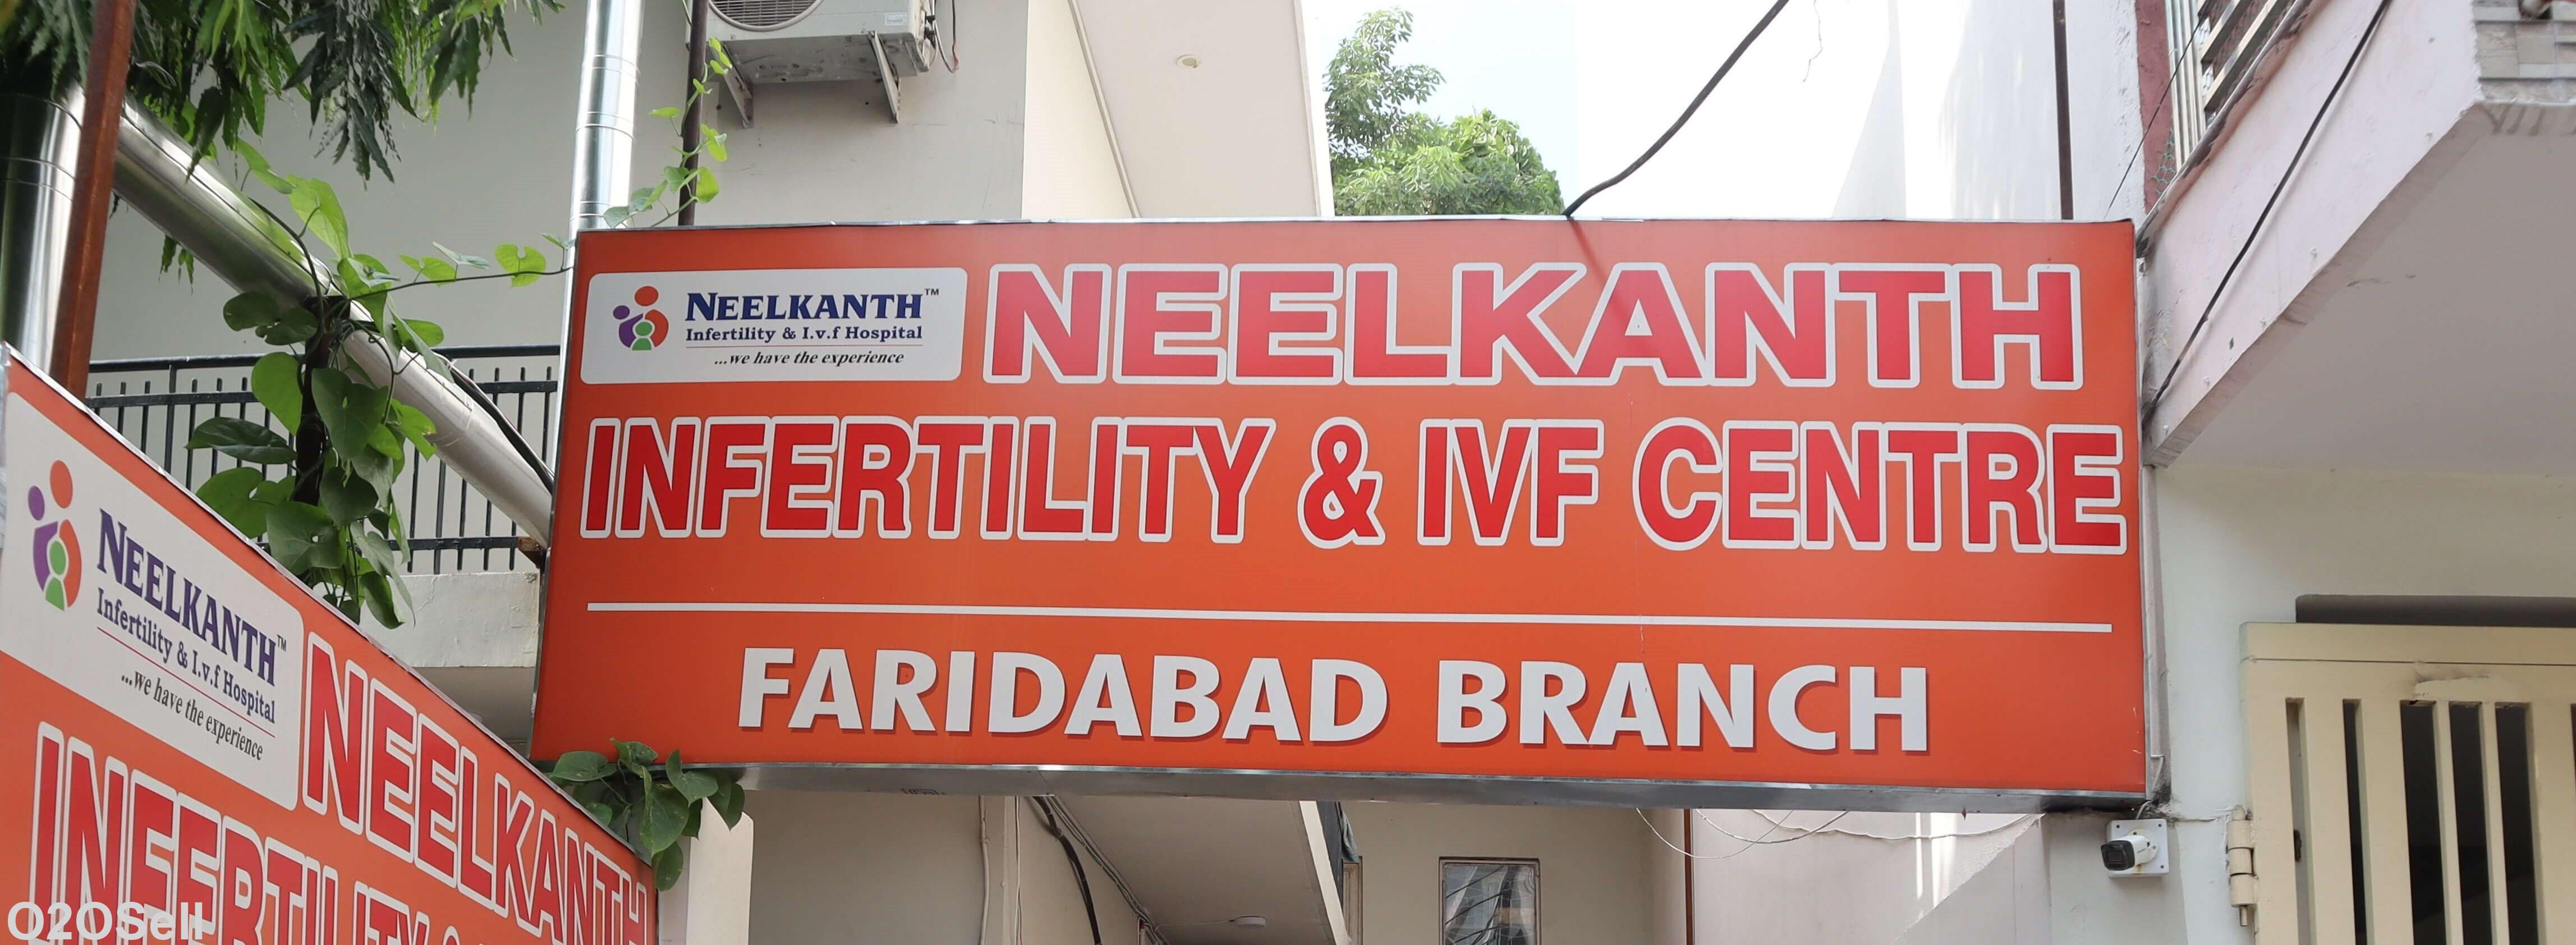 Neelkanth Infertility & IVF Centre : Best IVF Centre in Faridabad - Cover Image